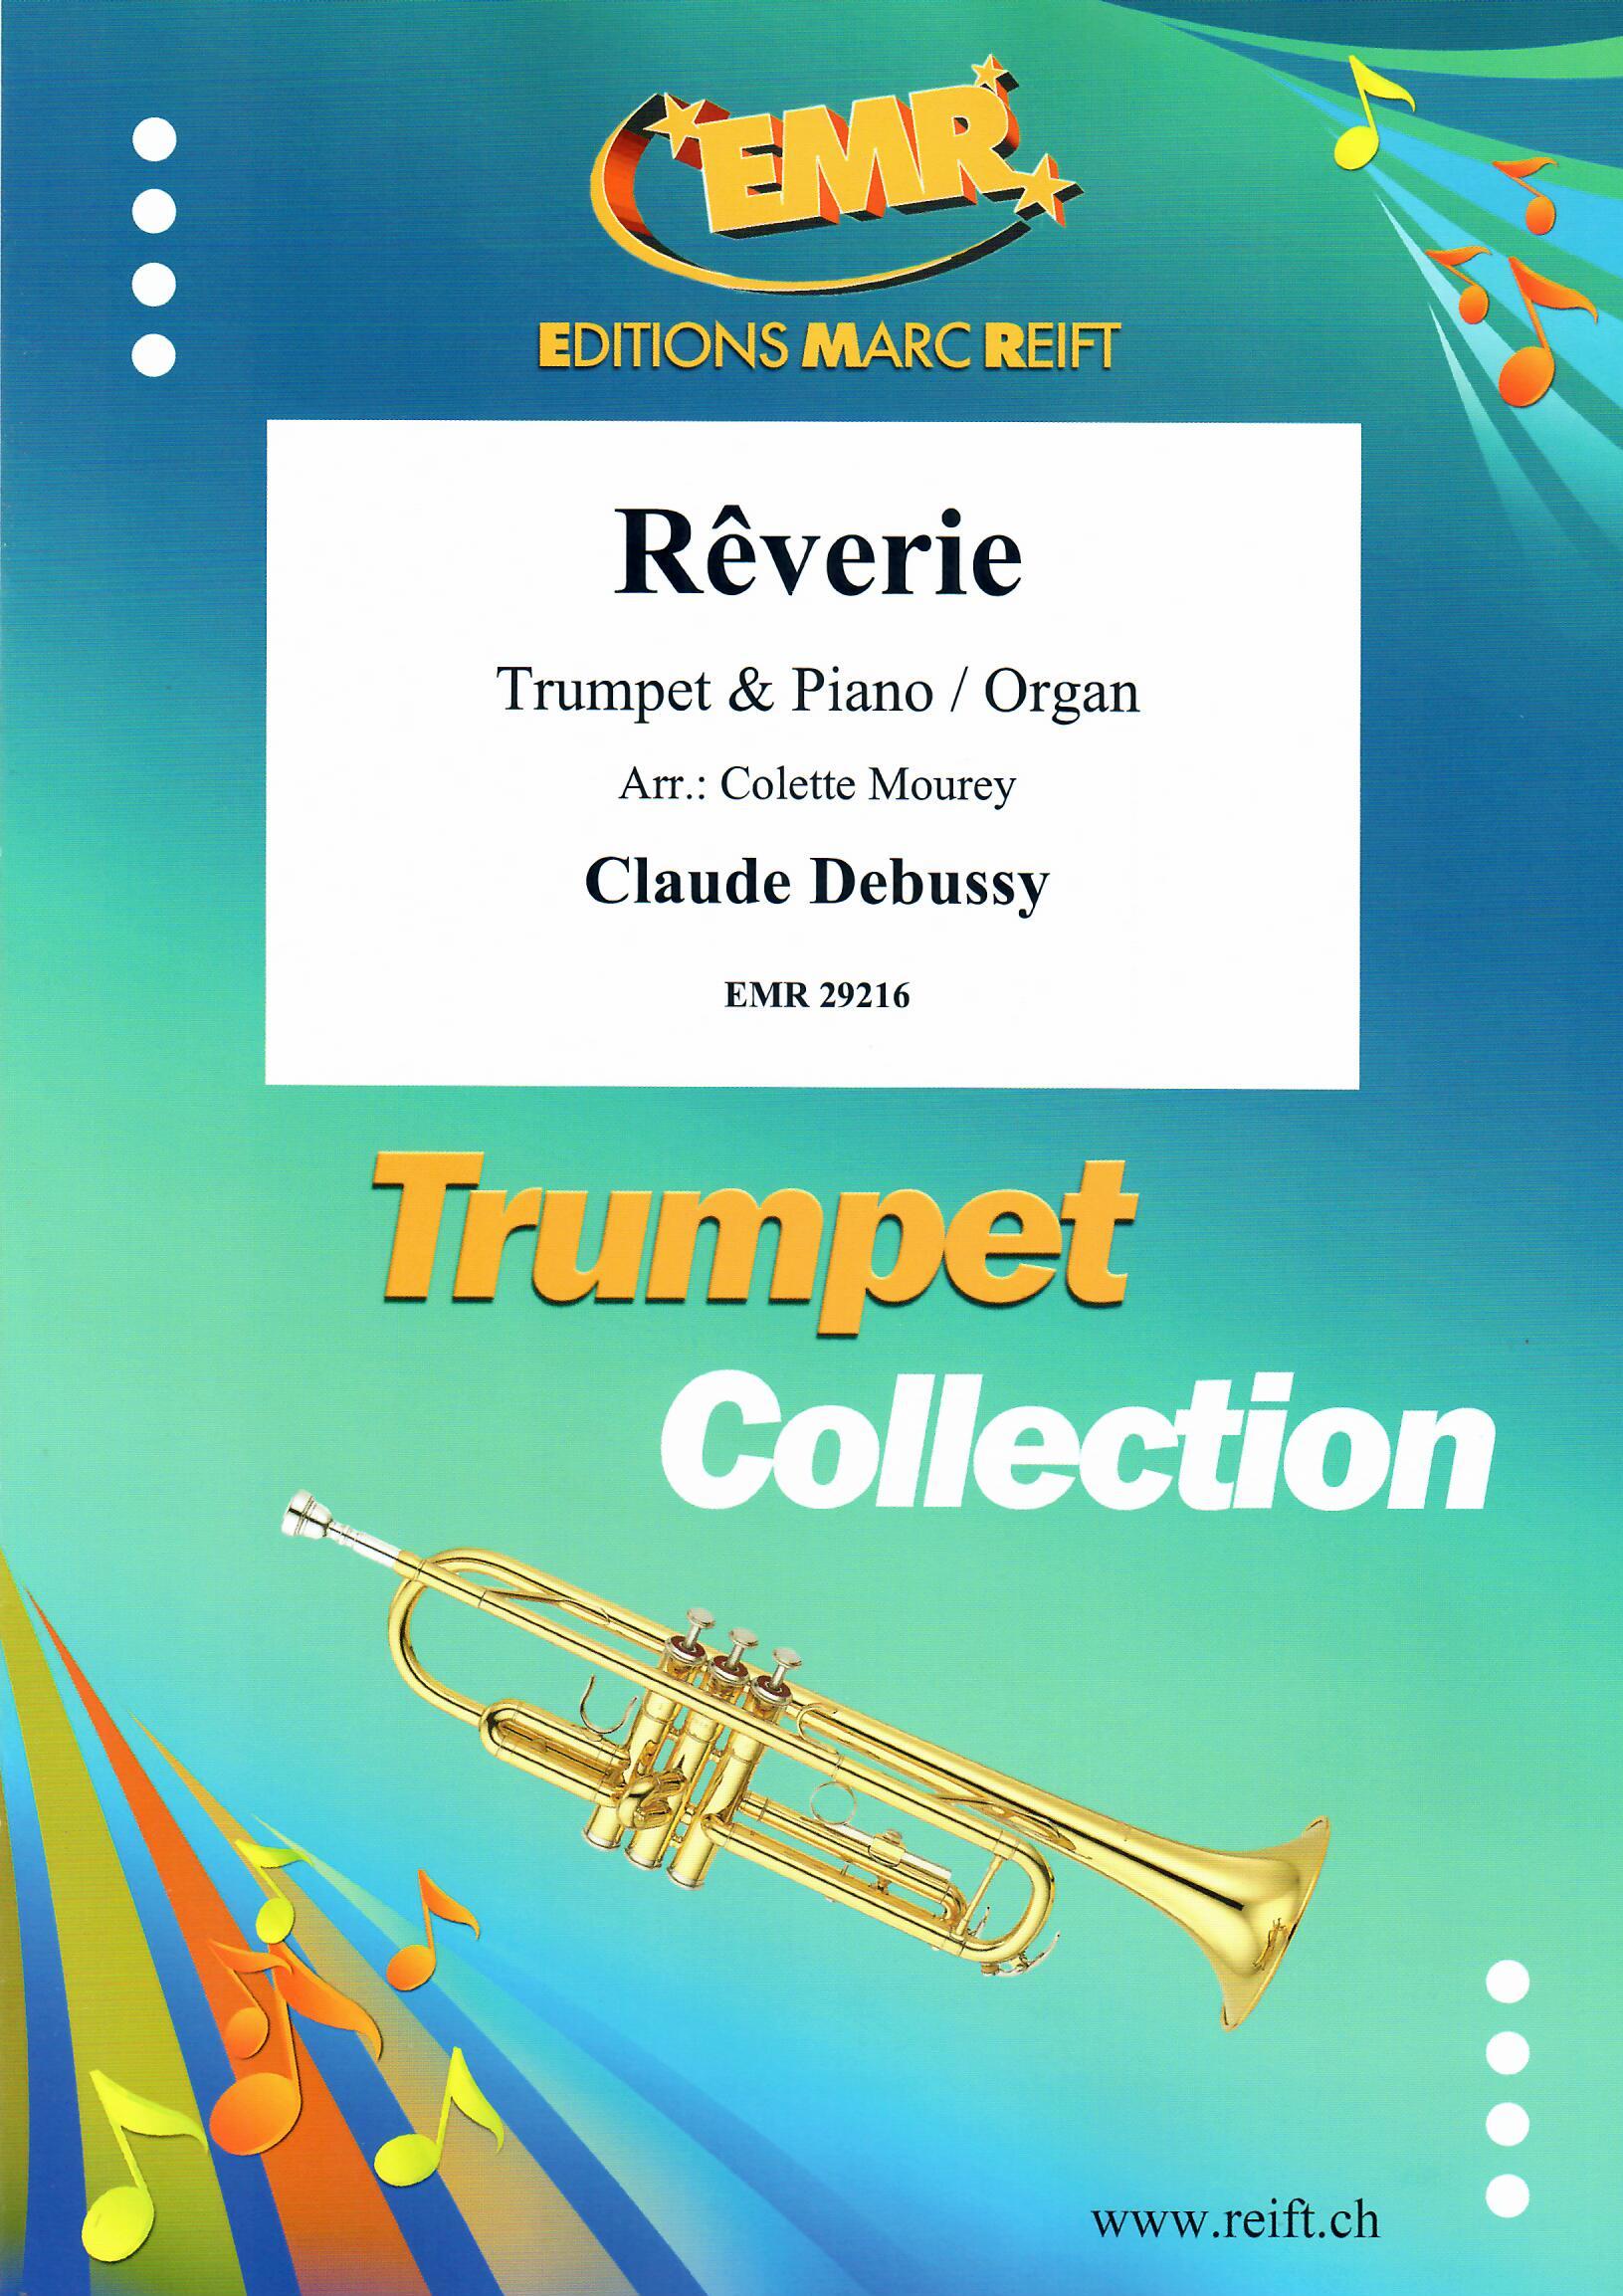 RêVERIE, SOLOS - B♭. Cornet/Trumpet with Piano